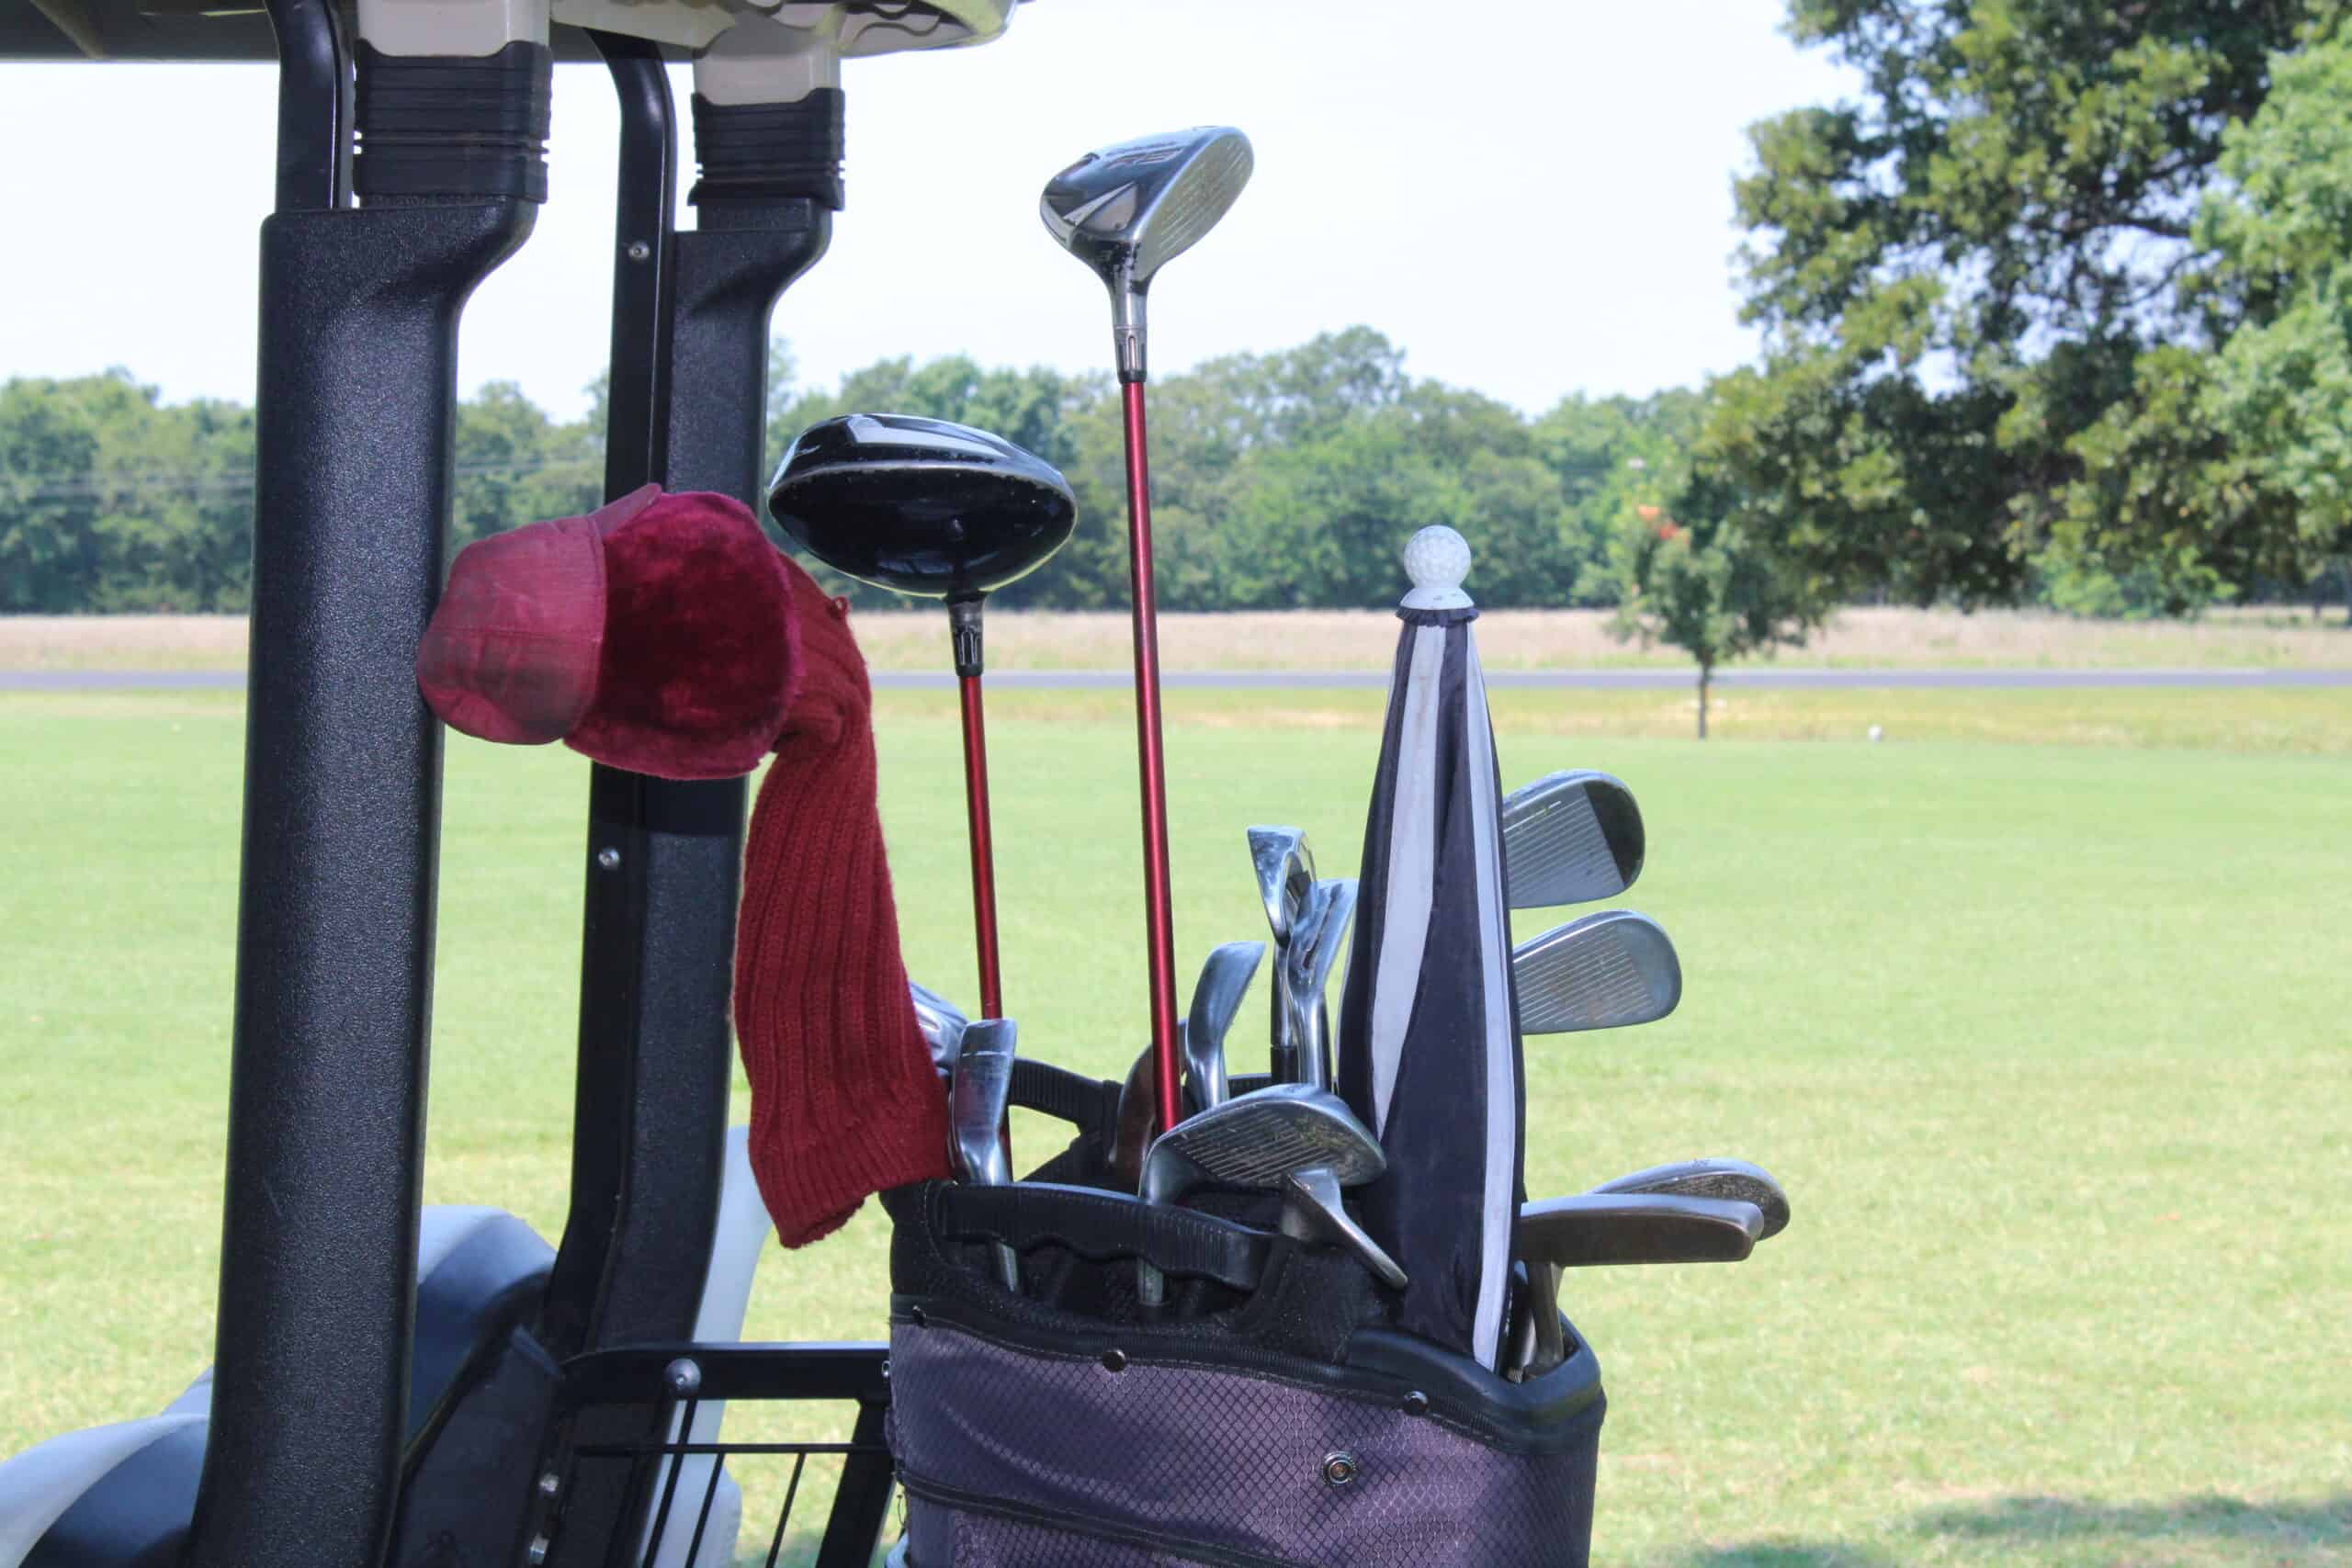 How to Prevent Golf Clubs from Hitting Each Other